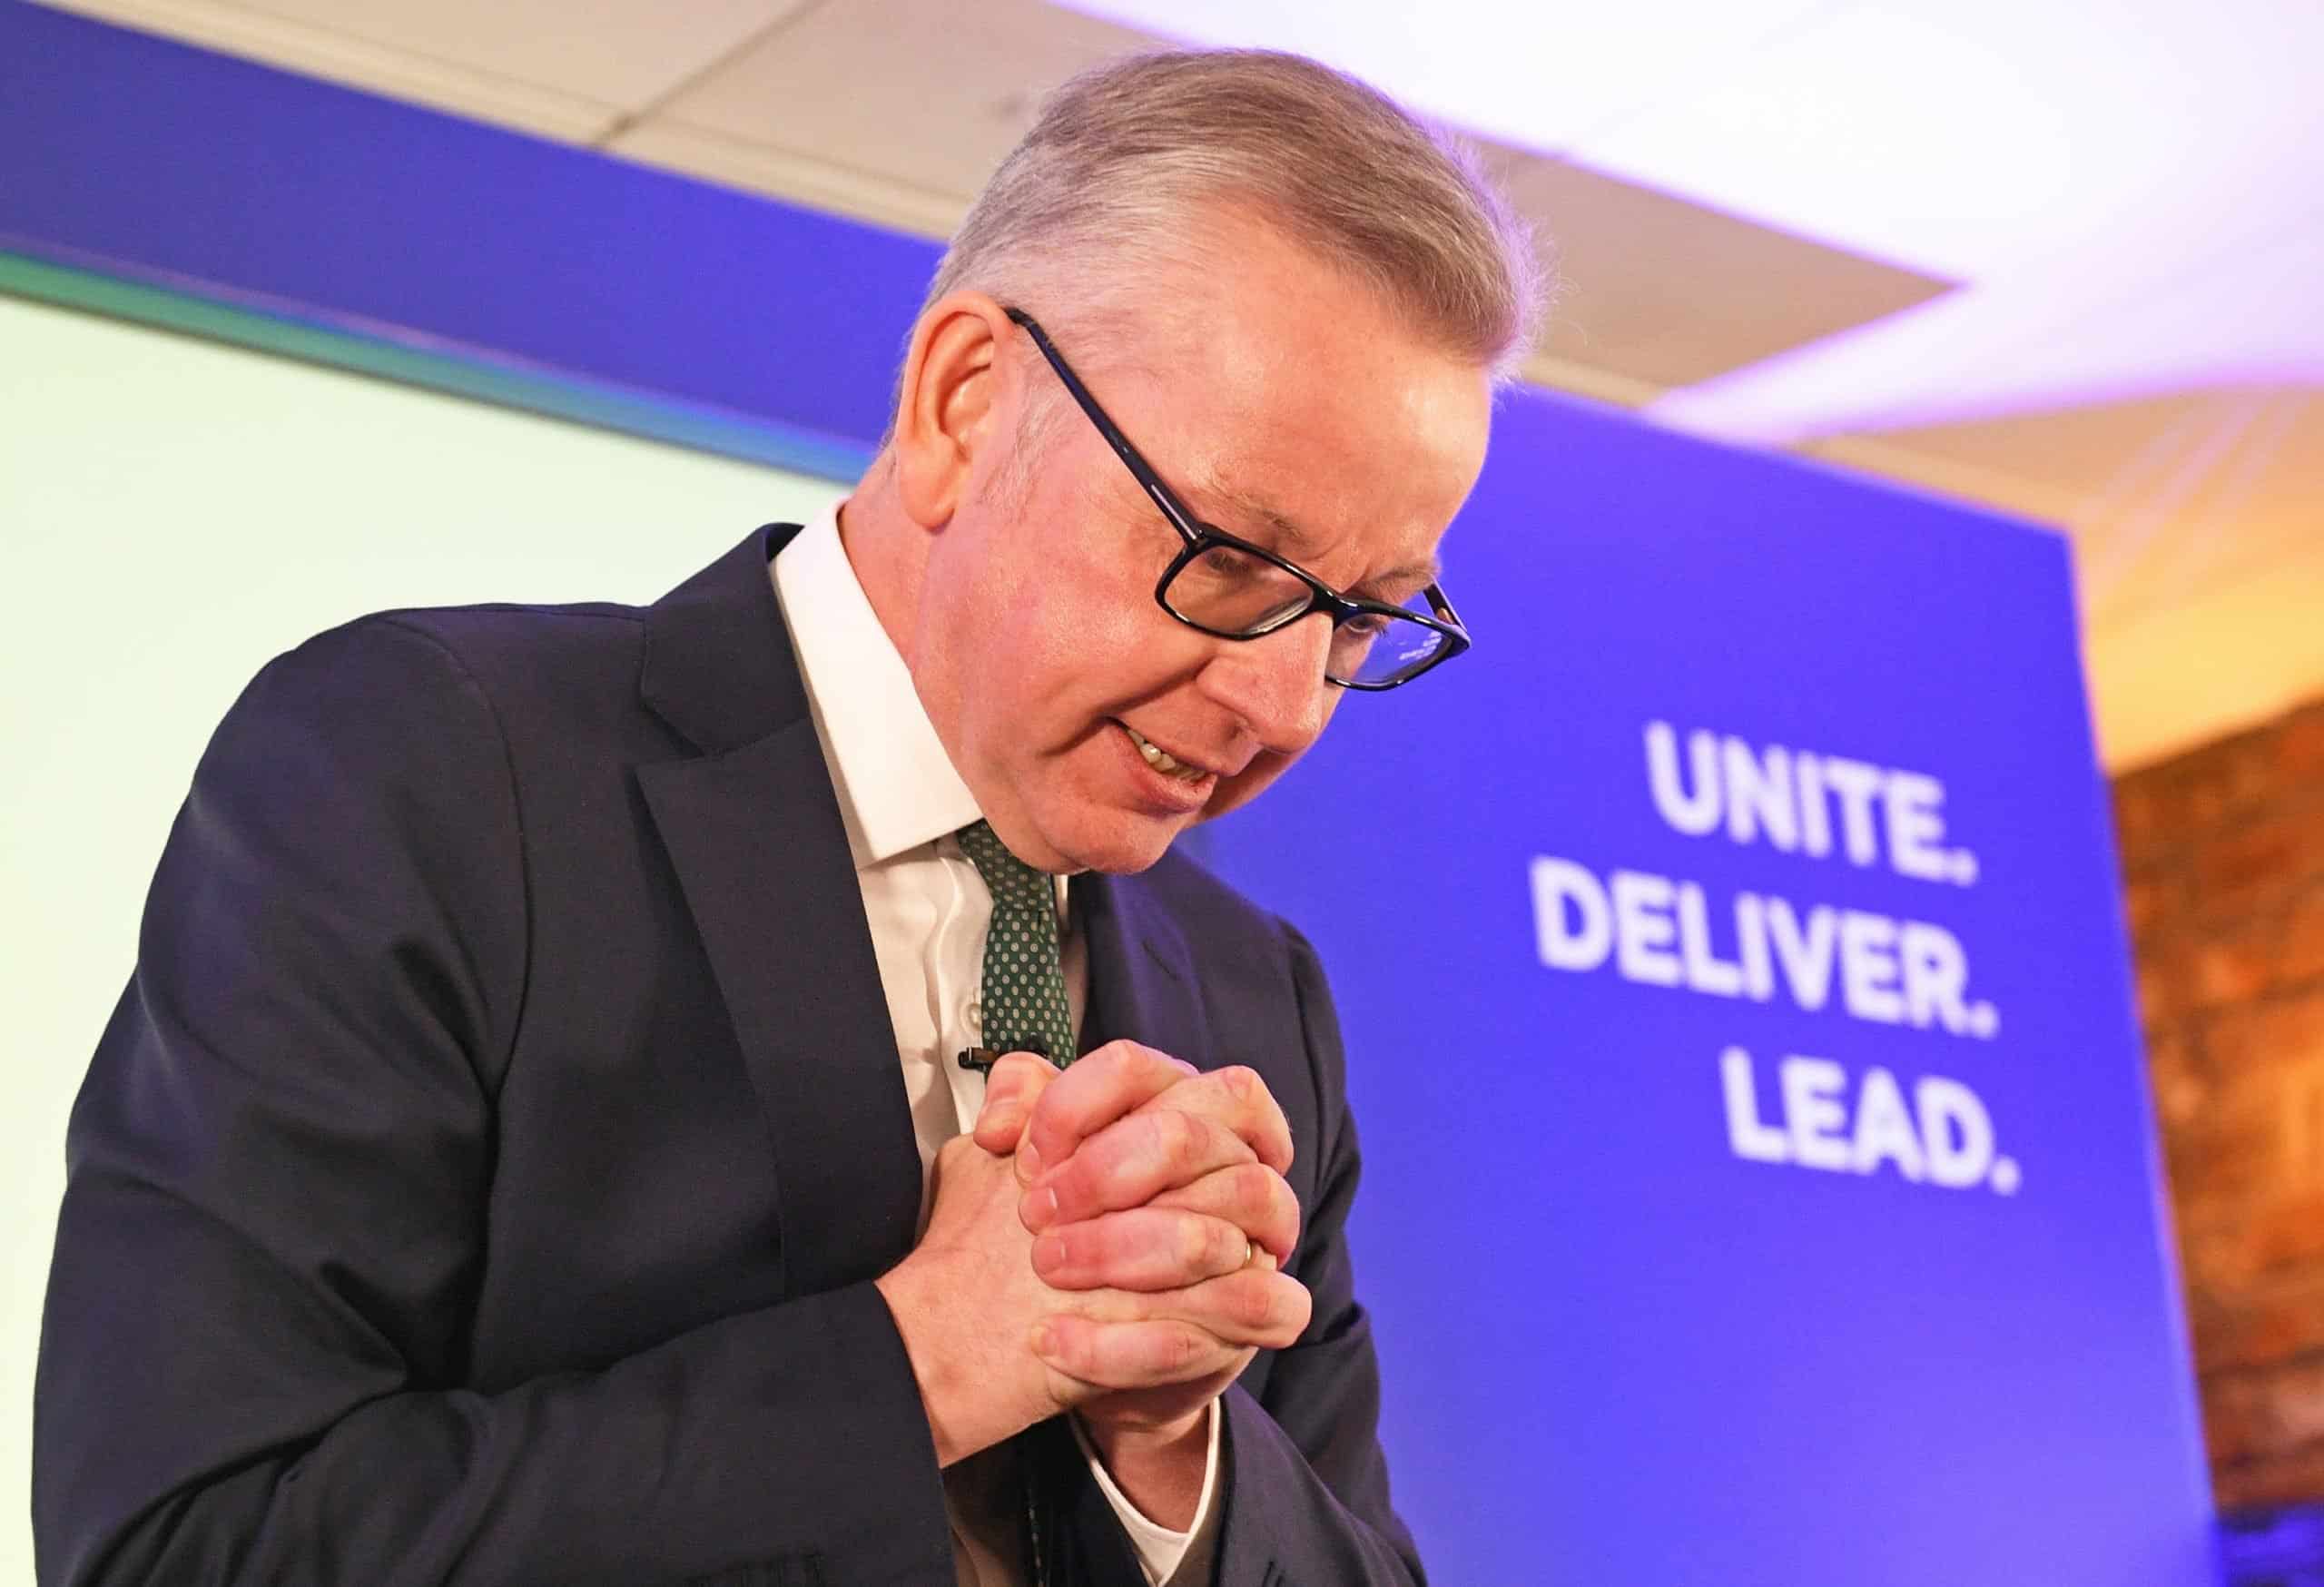 Watch: As UK burns Micheal Gove admits basic functions of state are not functioning